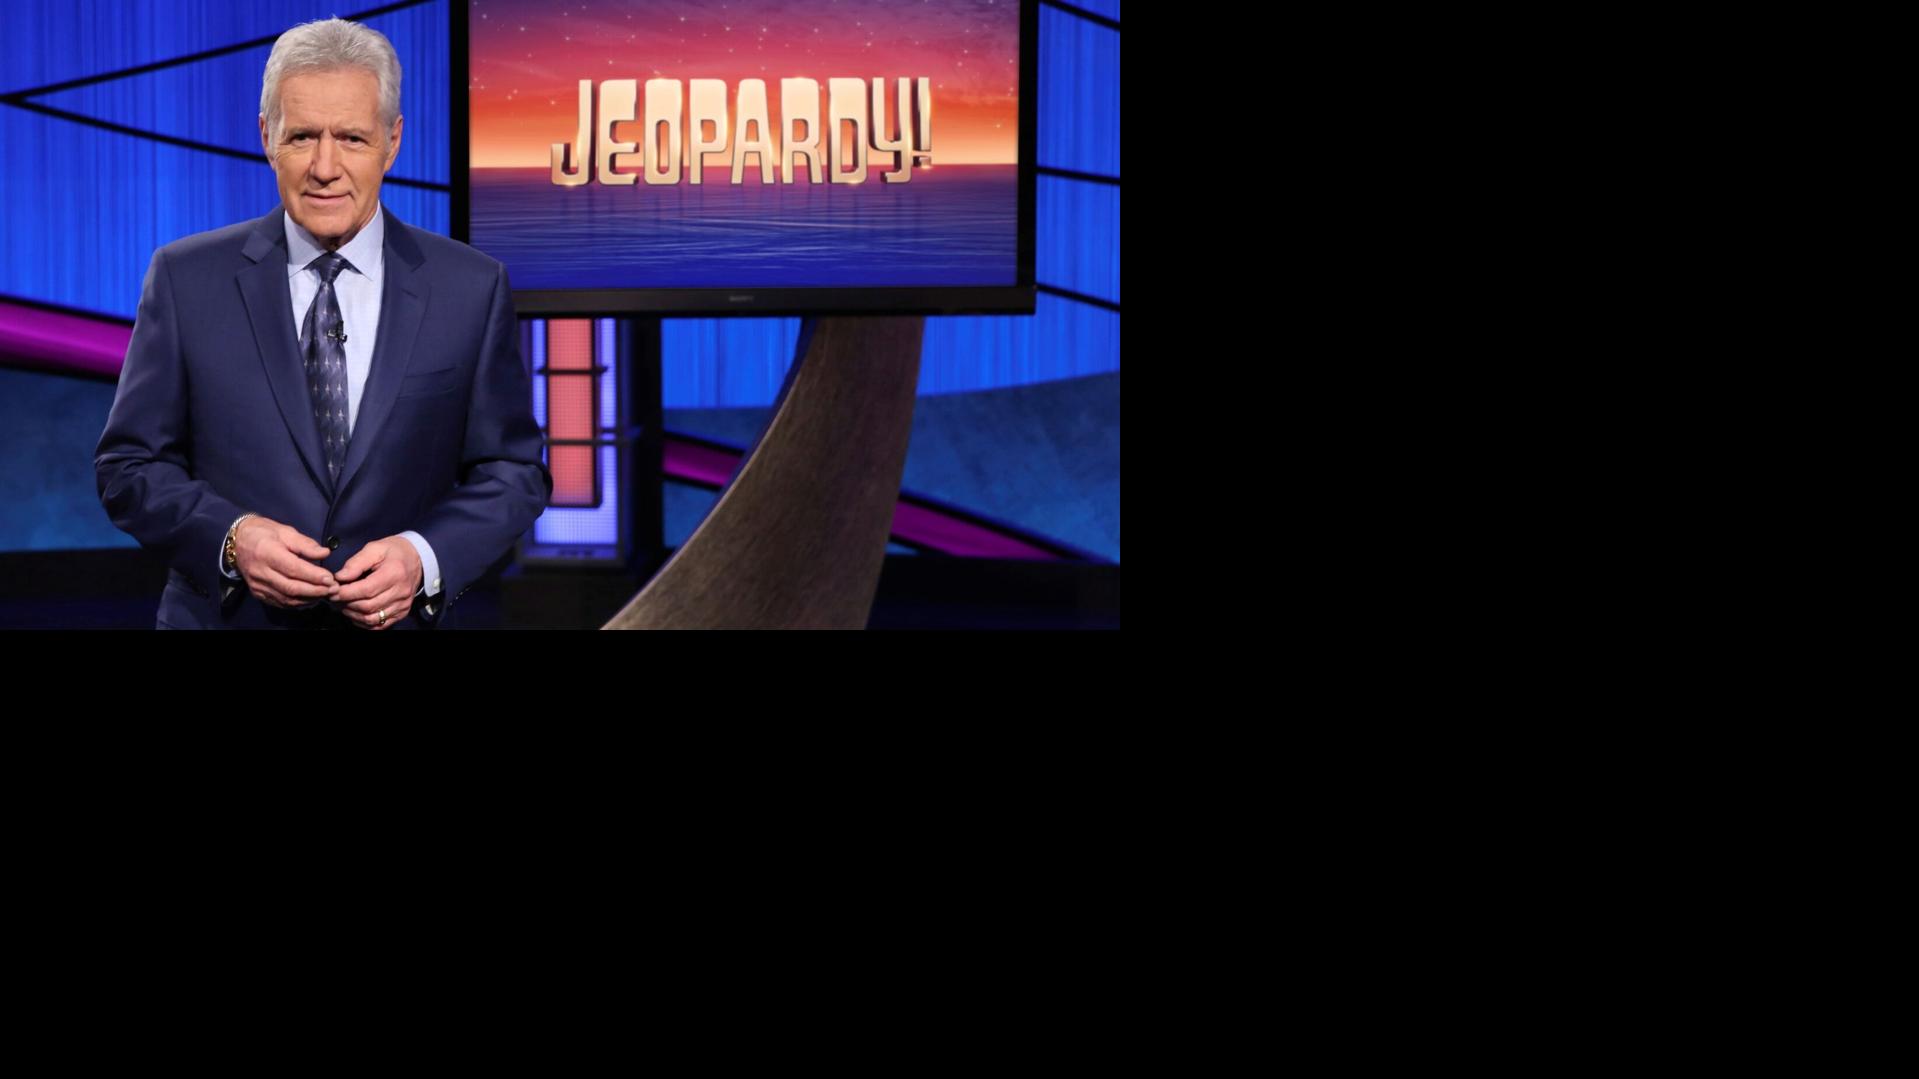 Trebek urges support for COVID-19 victims in of his final shows | Entertainment tucson.com